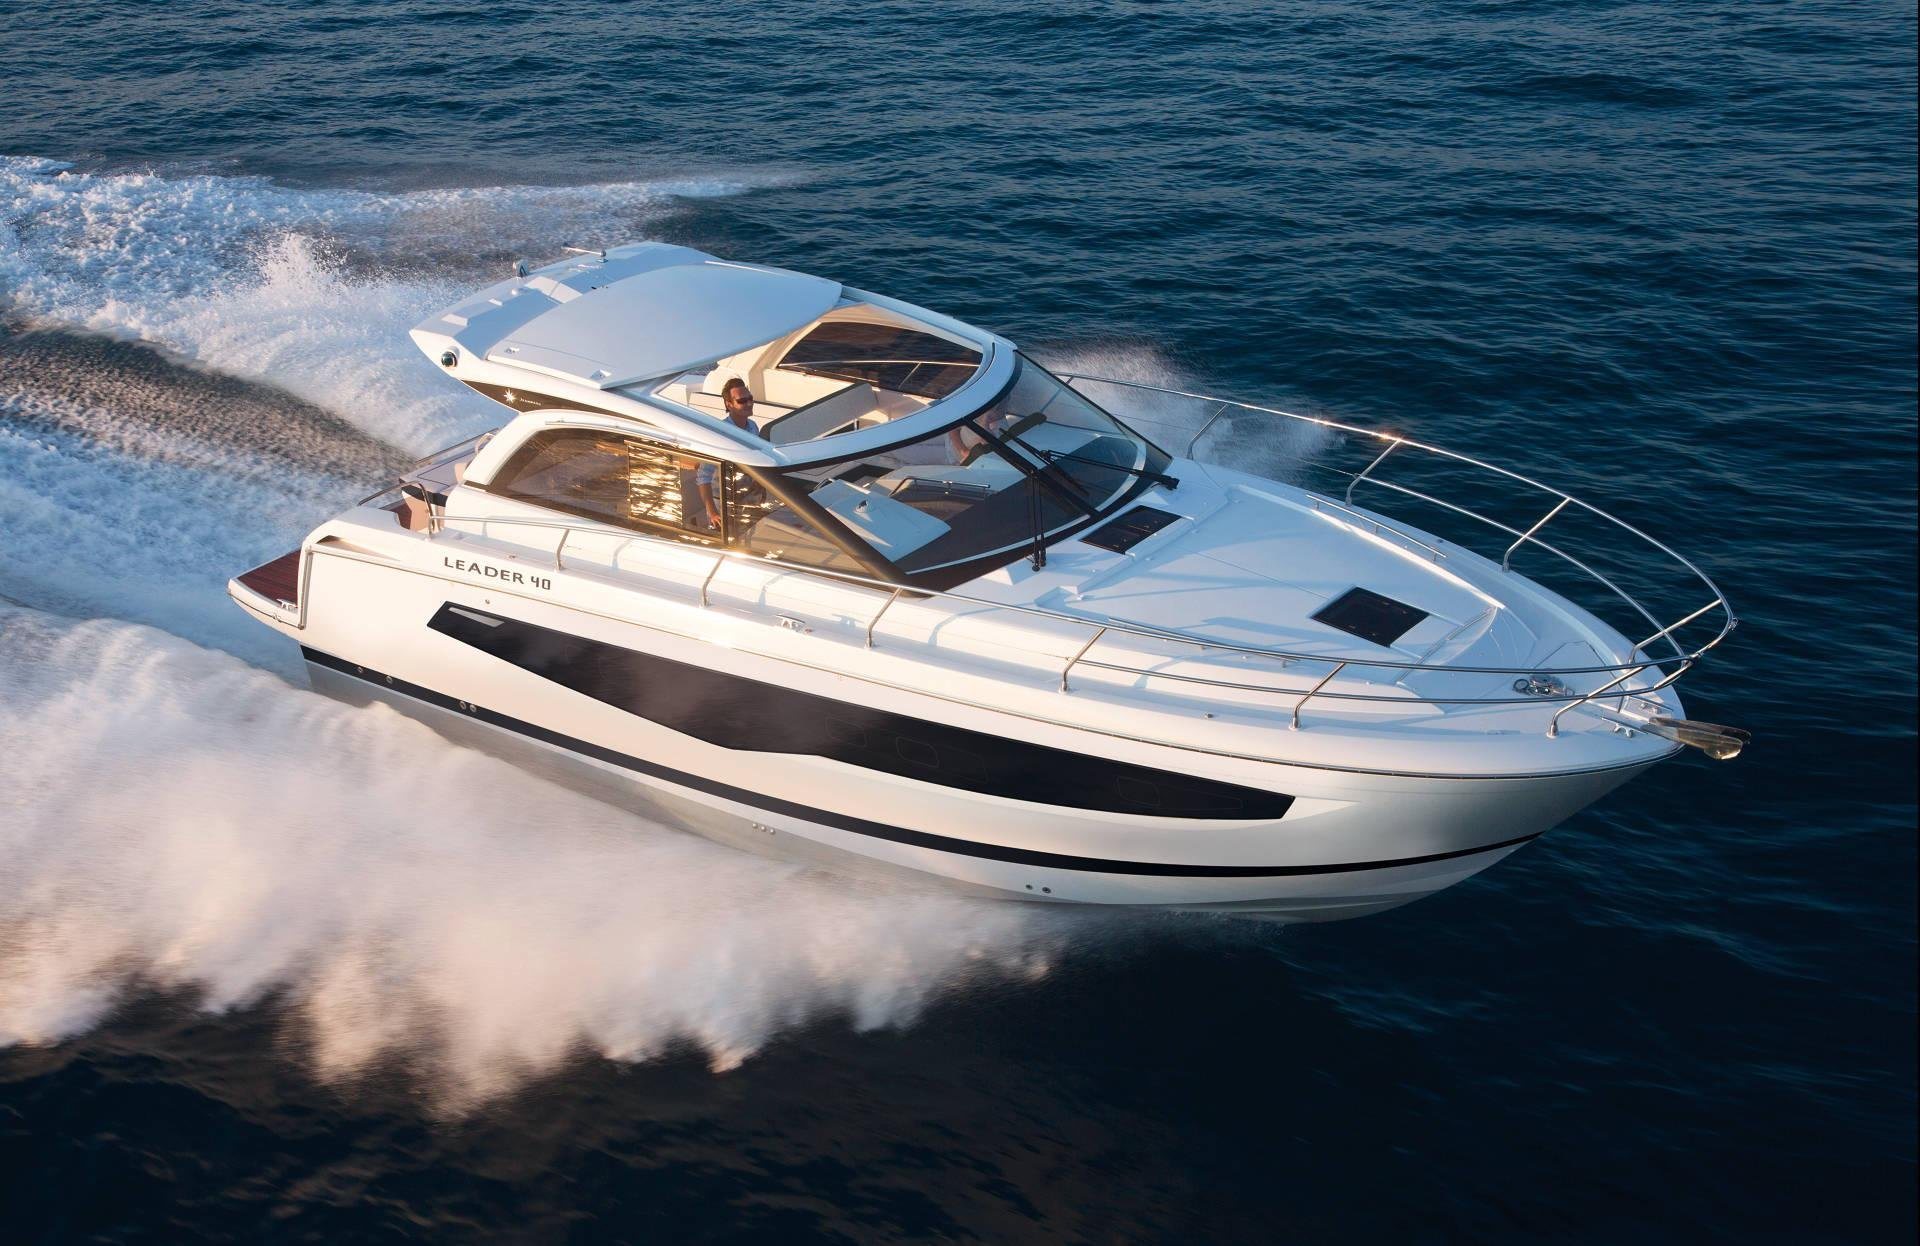 360 VR Virtual Tours of the Jeanneau Leader 40